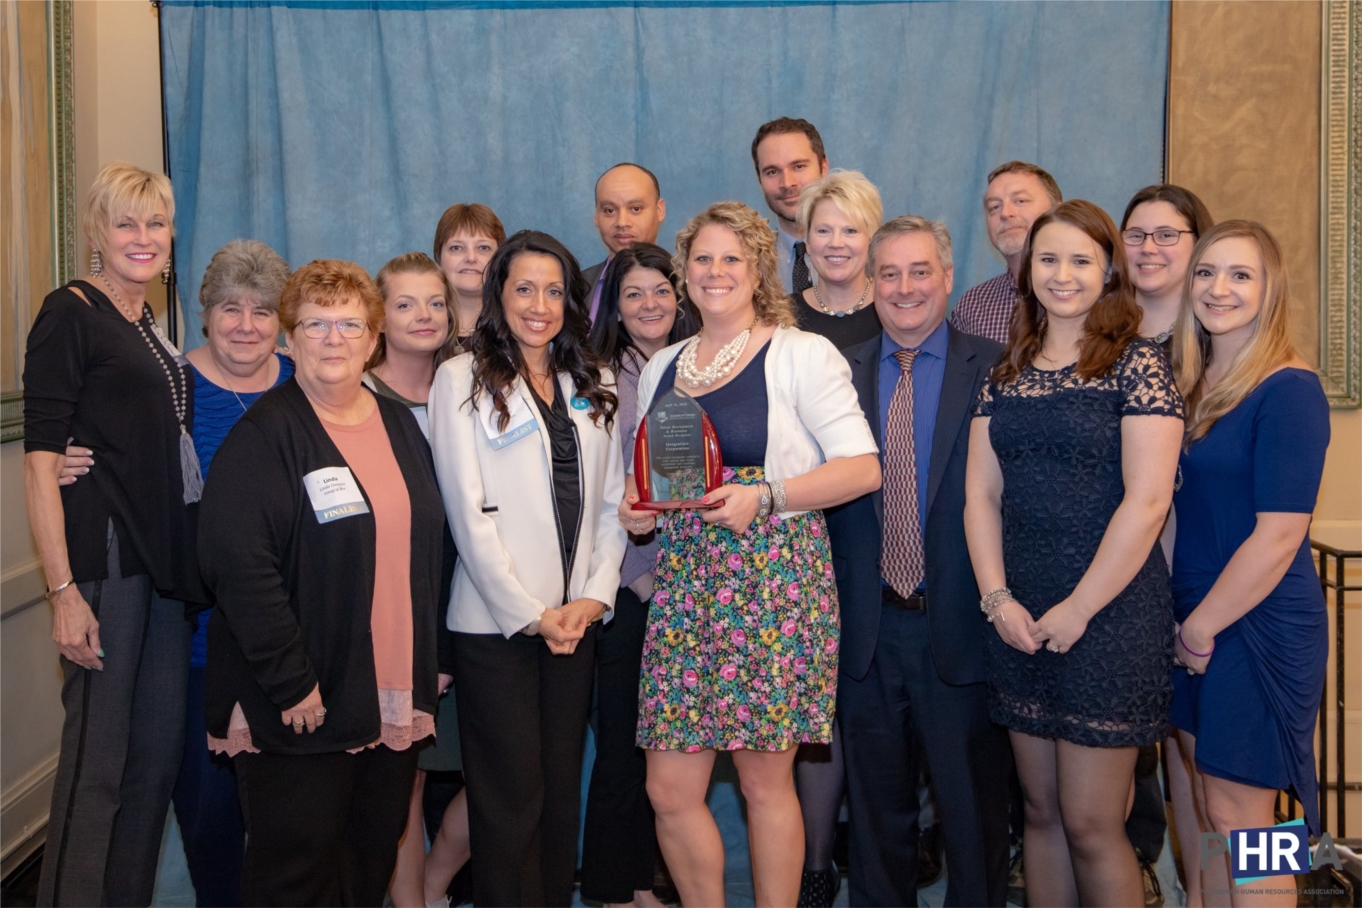 IntegraCare was honored with the Talent Recruitment & Retention Recognition award at PHRA's Engaging Pittsburgh event 2018! The award is for our innovative CAR Program, where team members with continued attendance can win a brand new car!

Lori Grant, Executive Director at Newhaven Court at Lindwood, was also among 8 finalists in the category of Leader of the Year.